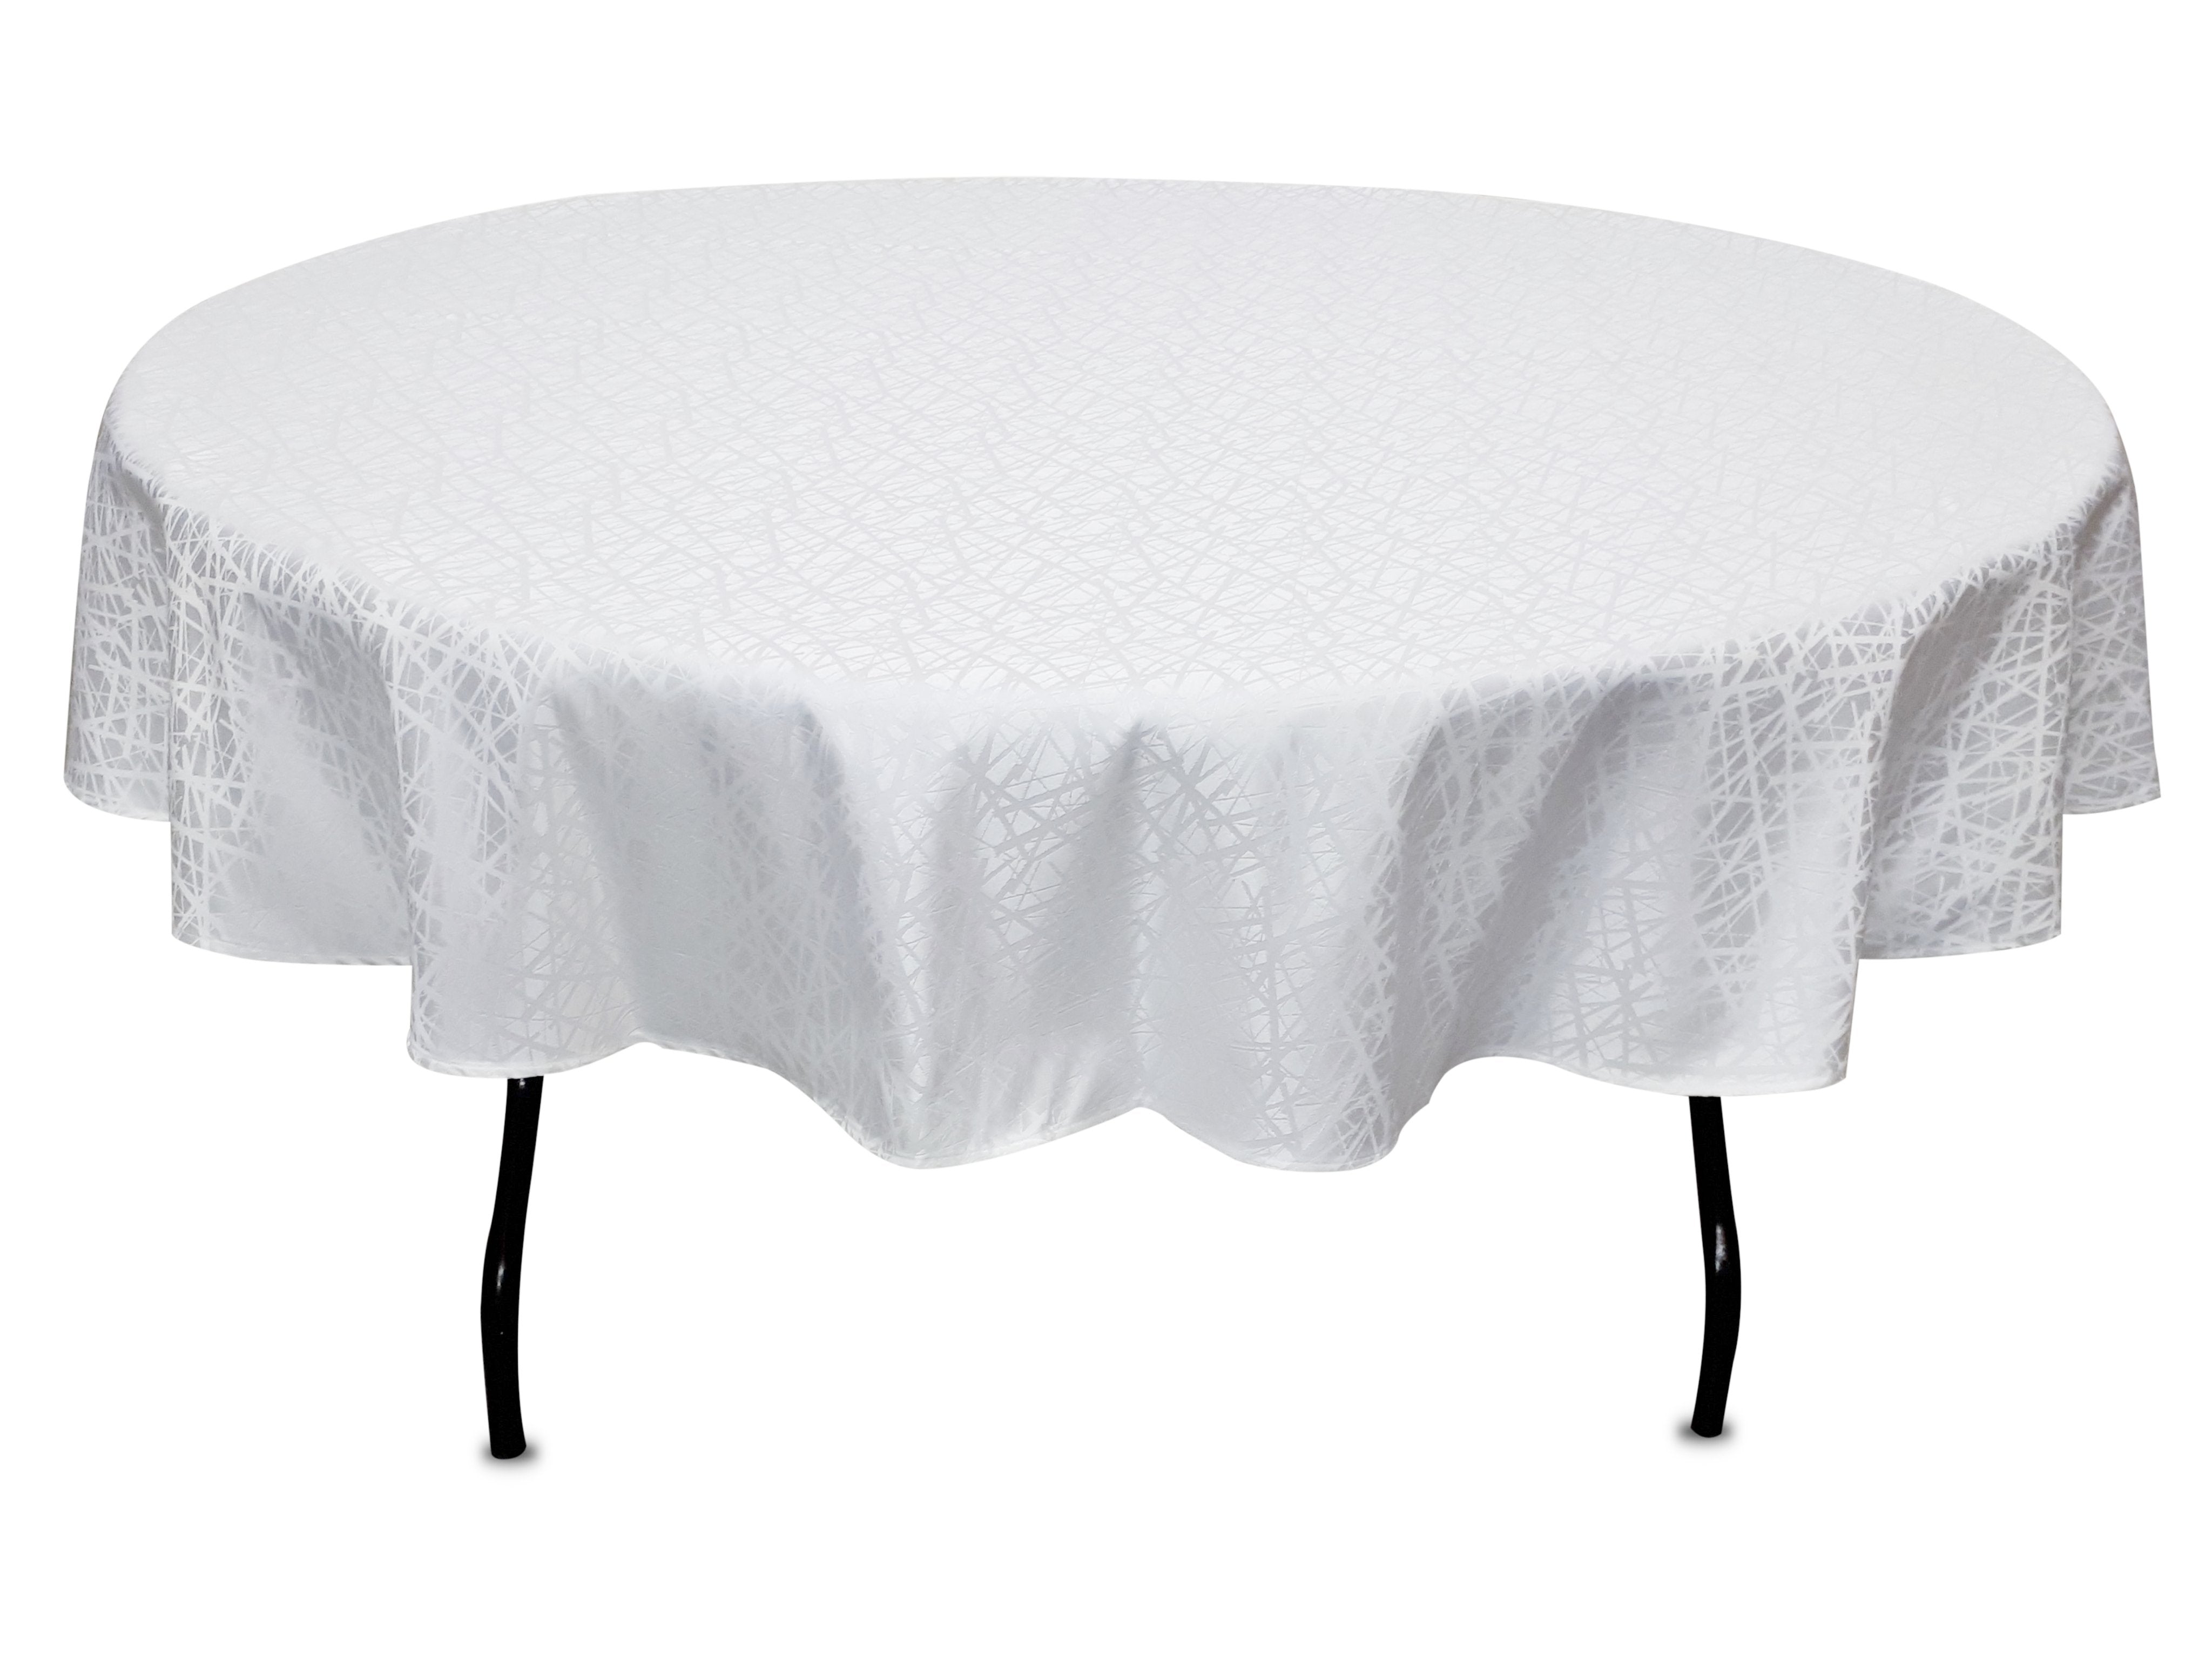 80 round tablecloth